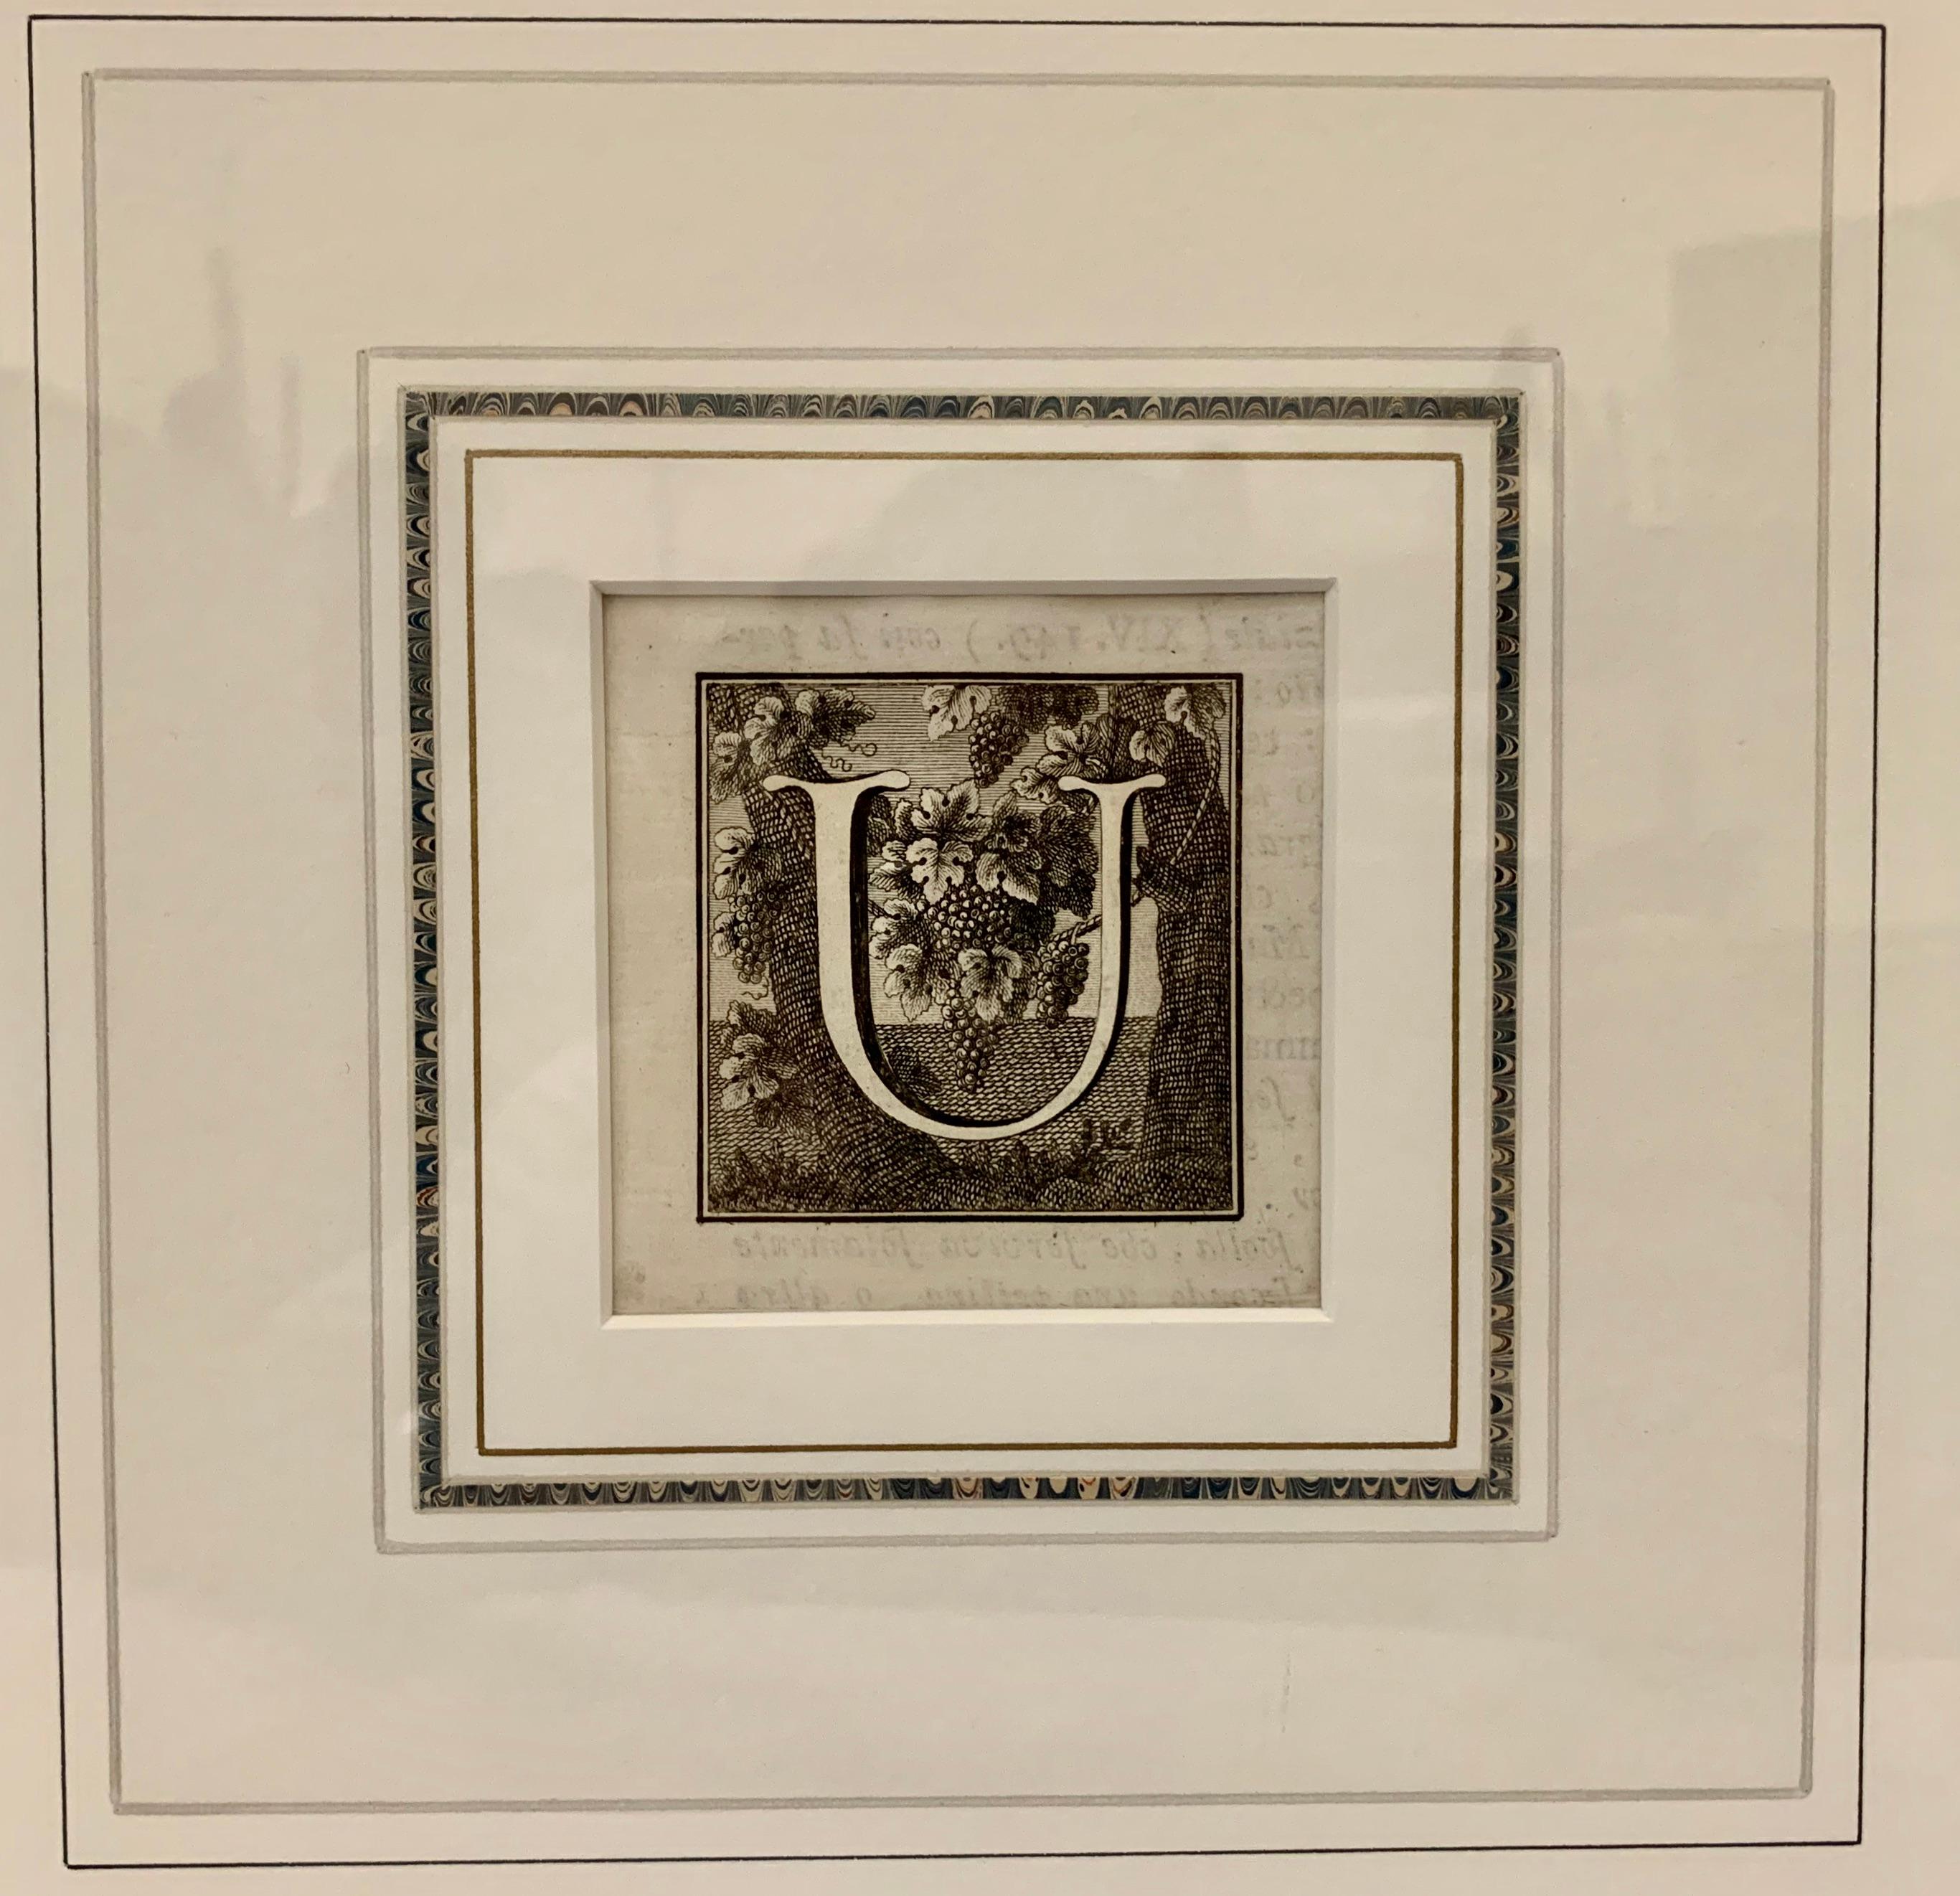 Neoclassical Framed Engraving of The Letter 